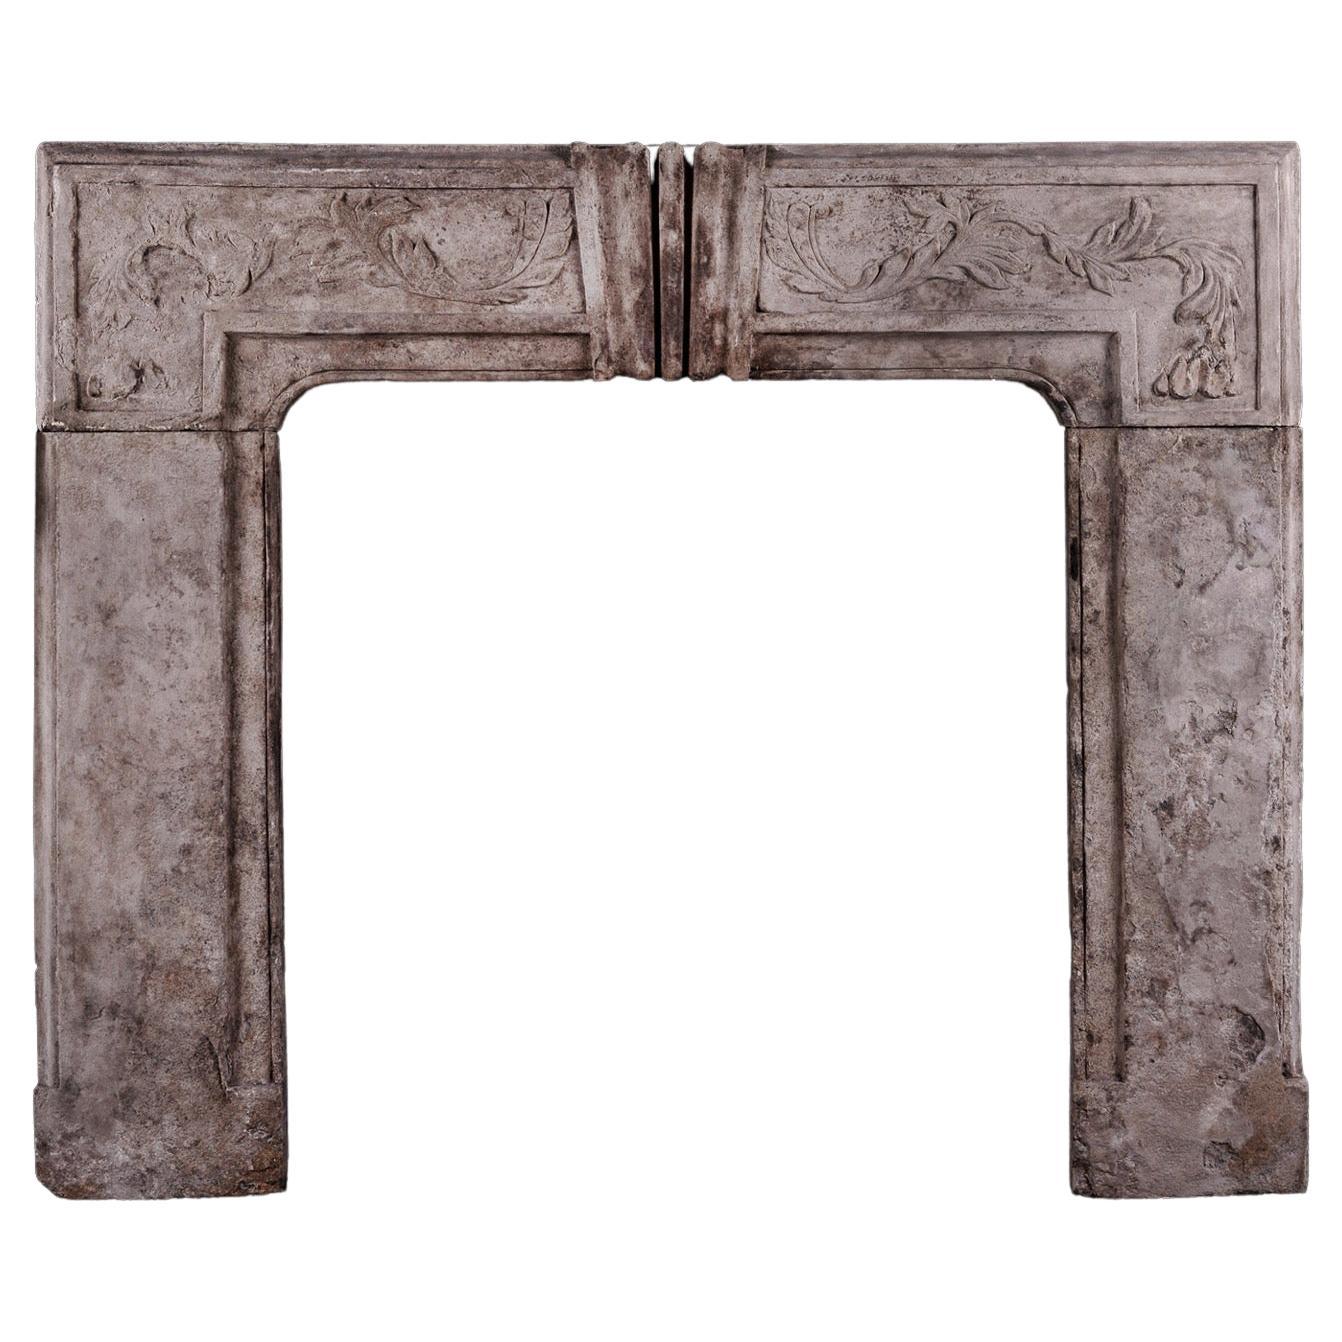 Period Queen Anne Stone Fireplace For Sale